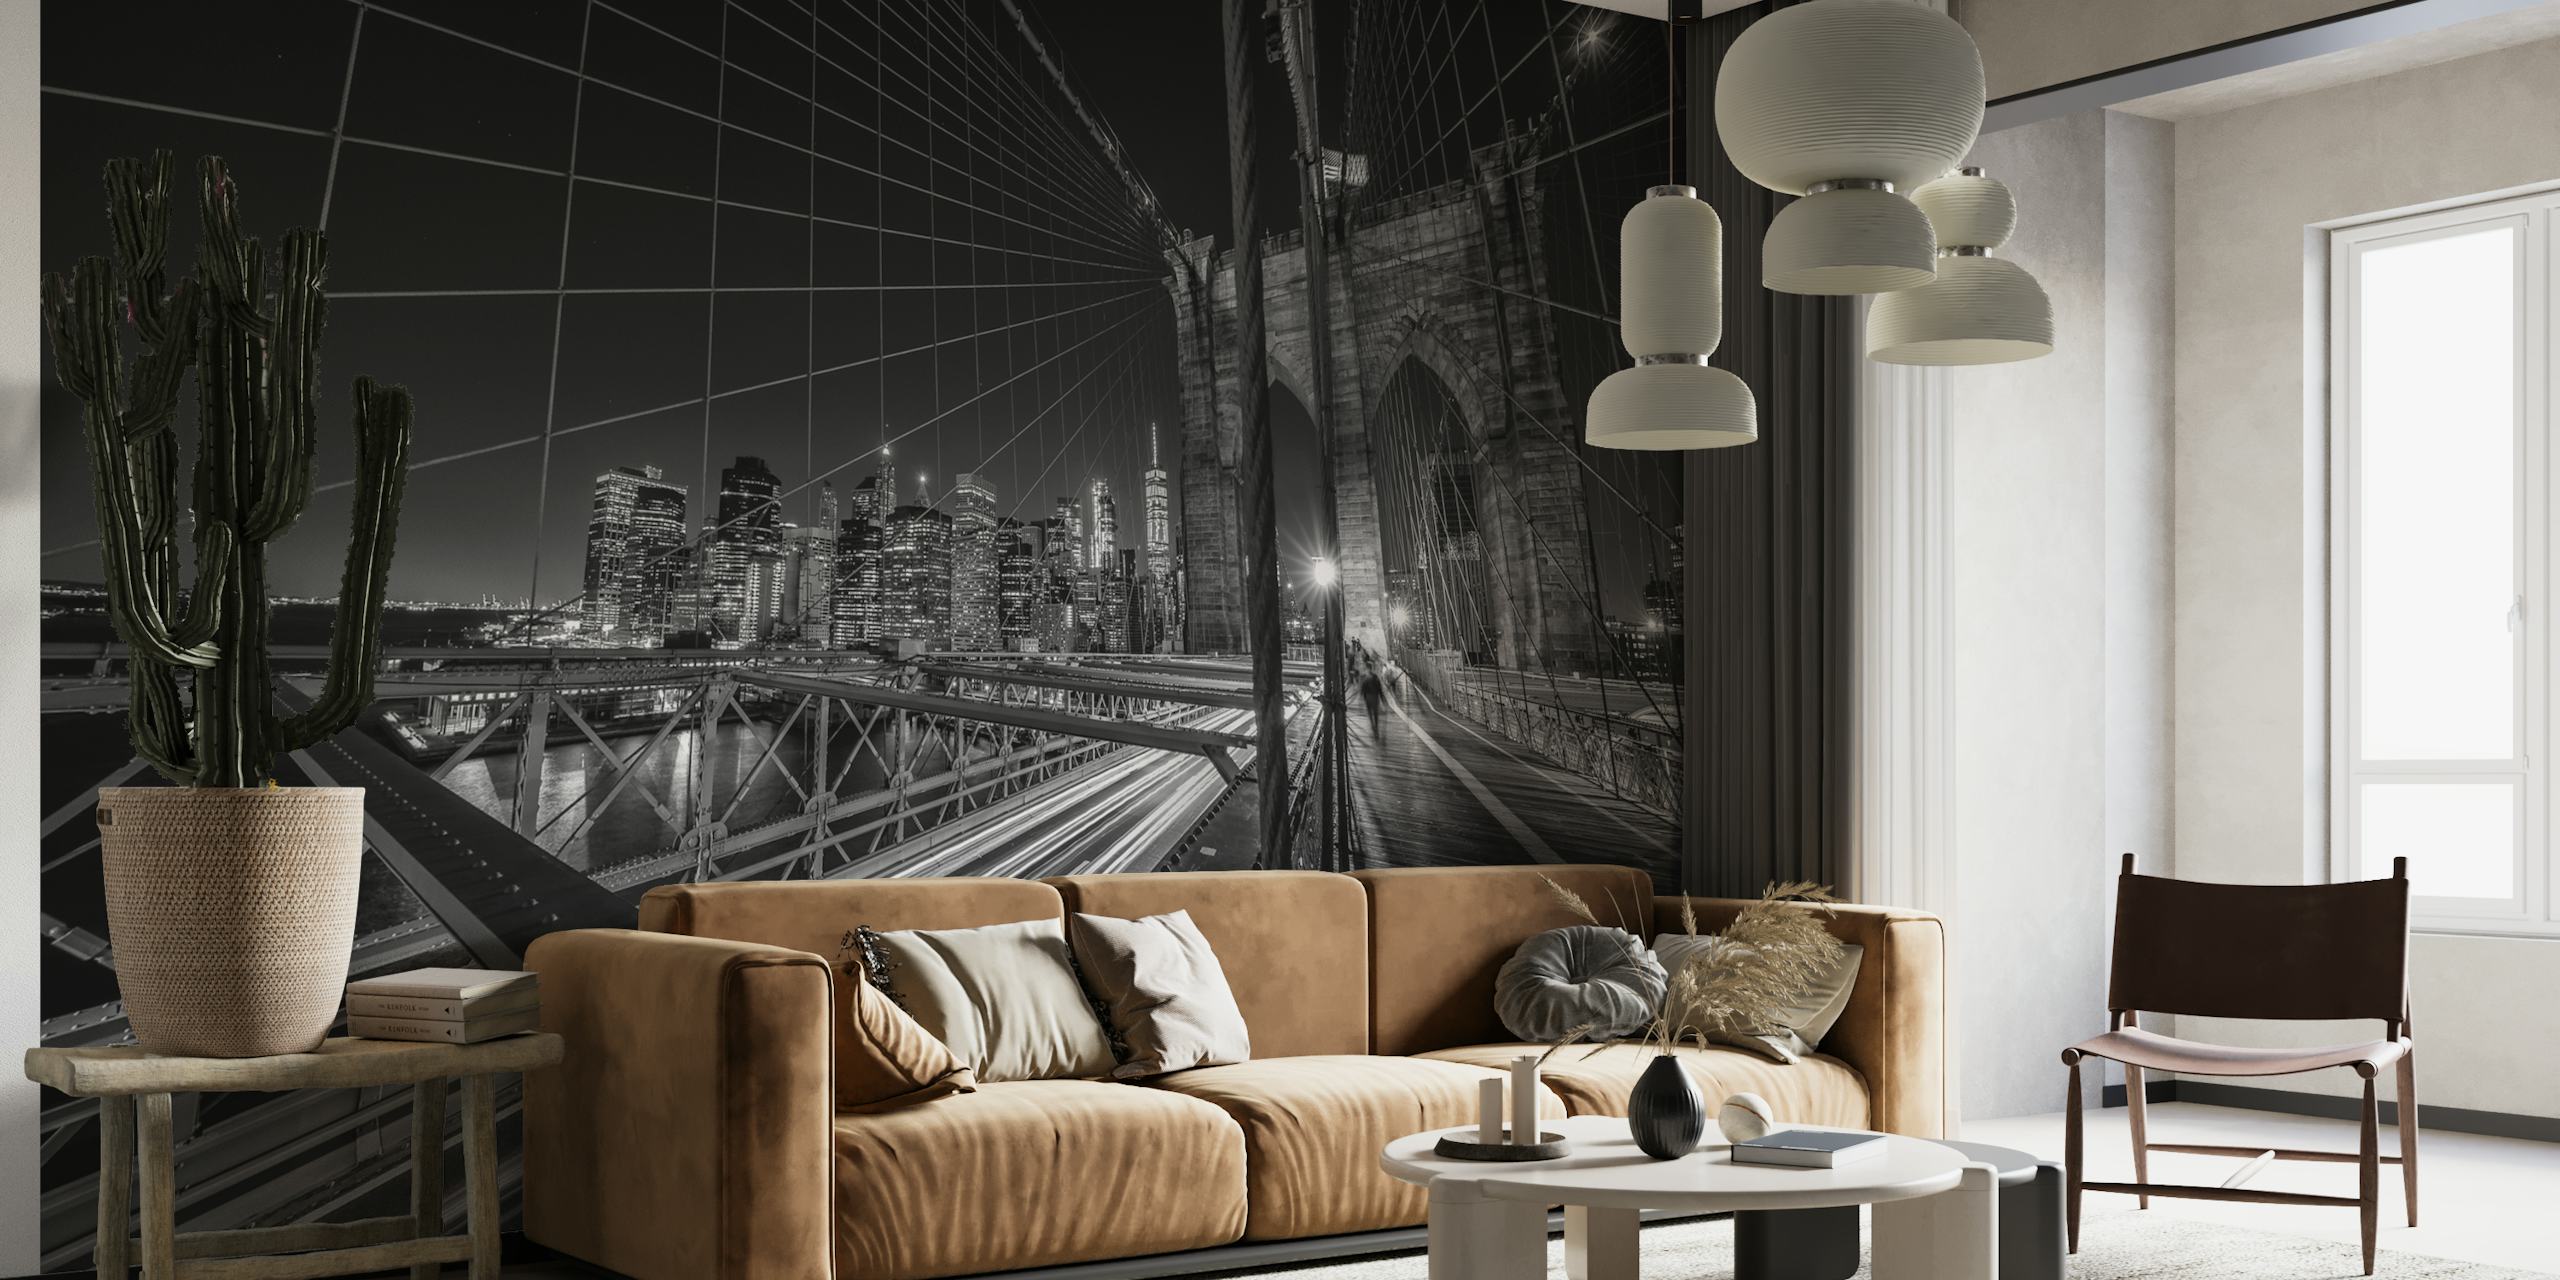 Black and white wall mural of the Brooklyn Bridge at night with city lights